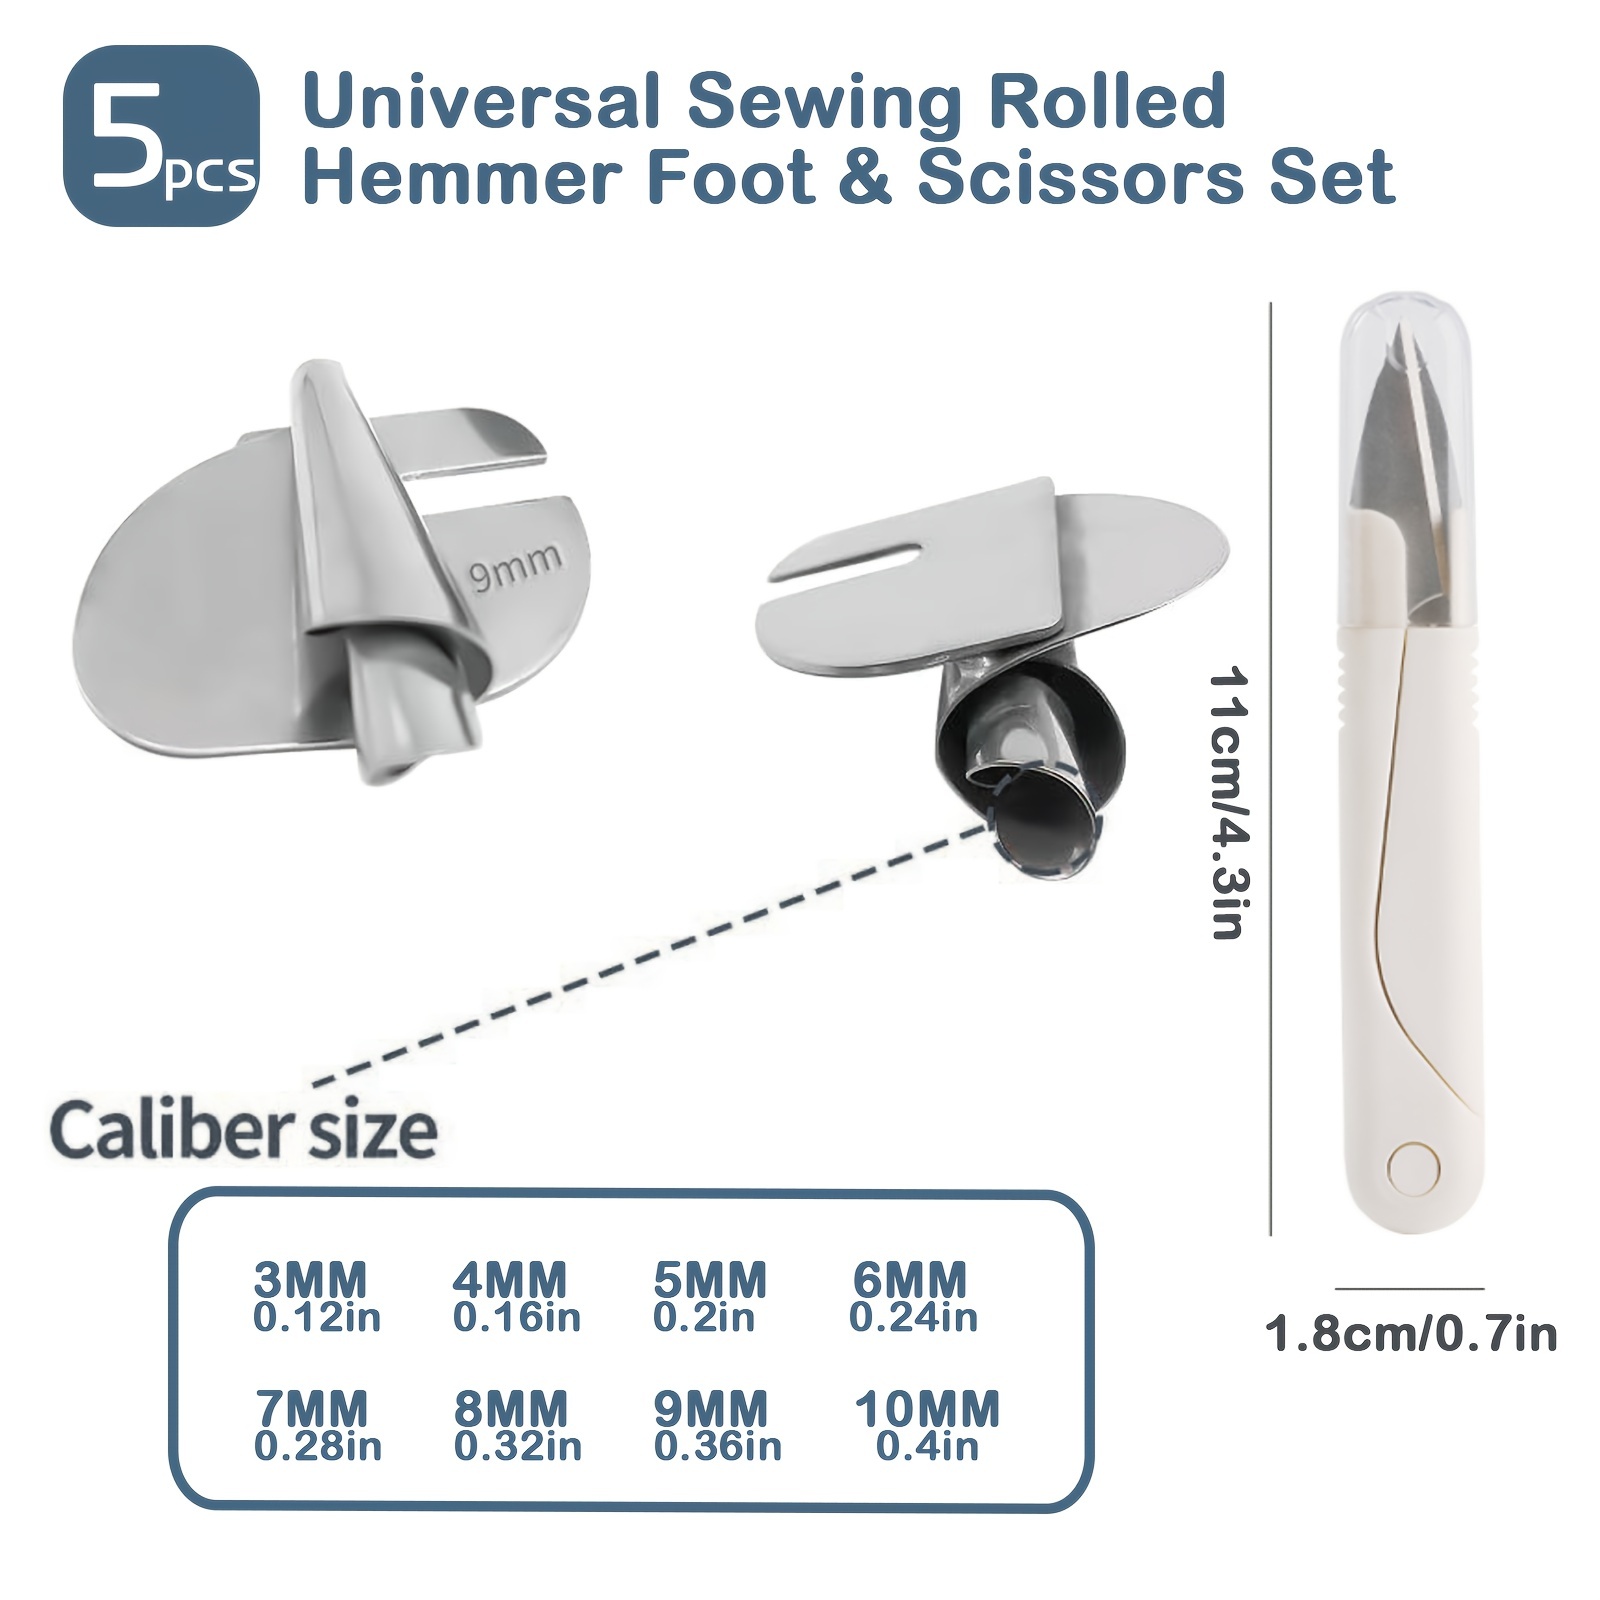  Universal Sewing Rolled Hemmer Foot Set- [3-10mm